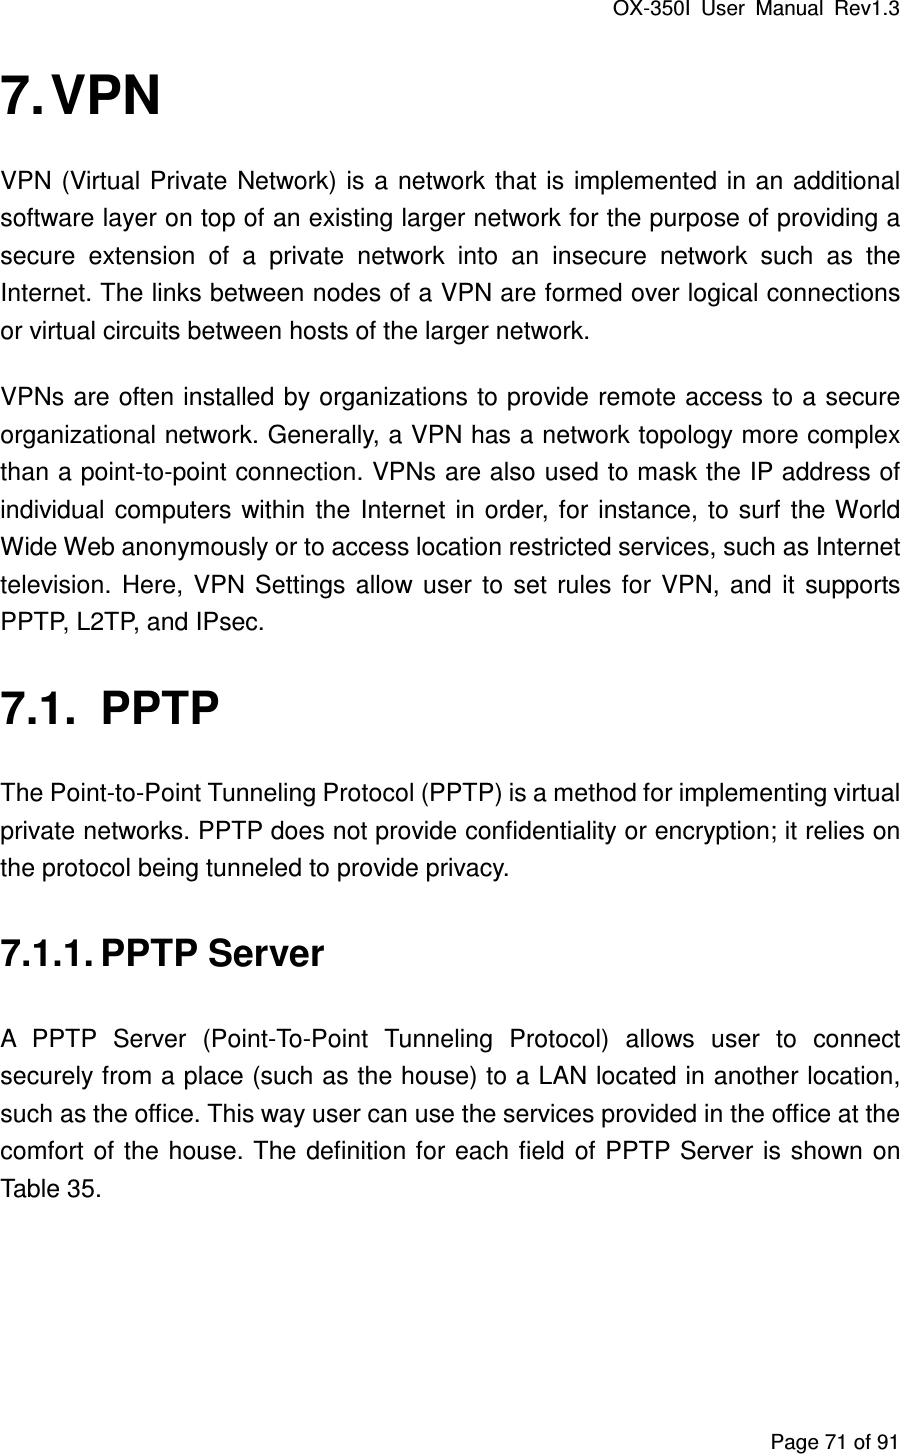 OX-350I  User  Manual  Rev1.3 Page 71 of 91 7. VPN VPN  (Virtual Private Network) is  a network that  is implemented in an additional software layer on top of an existing larger network for the purpose of providing a secure  extension  of  a  private  network  into  an  insecure  network  such  as  the Internet. The links between nodes of a VPN are formed over logical connections or virtual circuits between hosts of the larger network.   VPNs are often installed by organizations to provide remote access to a secure organizational network. Generally, a VPN has a network topology more complex than a point-to-point connection. VPNs are also used to mask the IP address of individual  computers  within  the  Internet  in  order, for  instance,  to  surf  the World Wide Web anonymously or to access location restricted services, such as Internet television.  Here,  VPN  Settings  allow  user  to  set  rules  for  VPN,  and  it  supports PPTP, L2TP, and IPsec. 7.1.  PPTP The Point-to-Point Tunneling Protocol (PPTP) is a method for implementing virtual private networks. PPTP does not provide confidentiality or encryption; it relies on the protocol being tunneled to provide privacy. 7.1.1. PPTP Server A  PPTP  Server  (Point-To-Point  Tunneling  Protocol)  allows  user  to  connect securely from a place (such as the house) to a LAN located in another location, such as the office. This way user can use the services provided in the office at the comfort  of the house. The definition for  each field of PPTP Server is  shown on Table 35. 